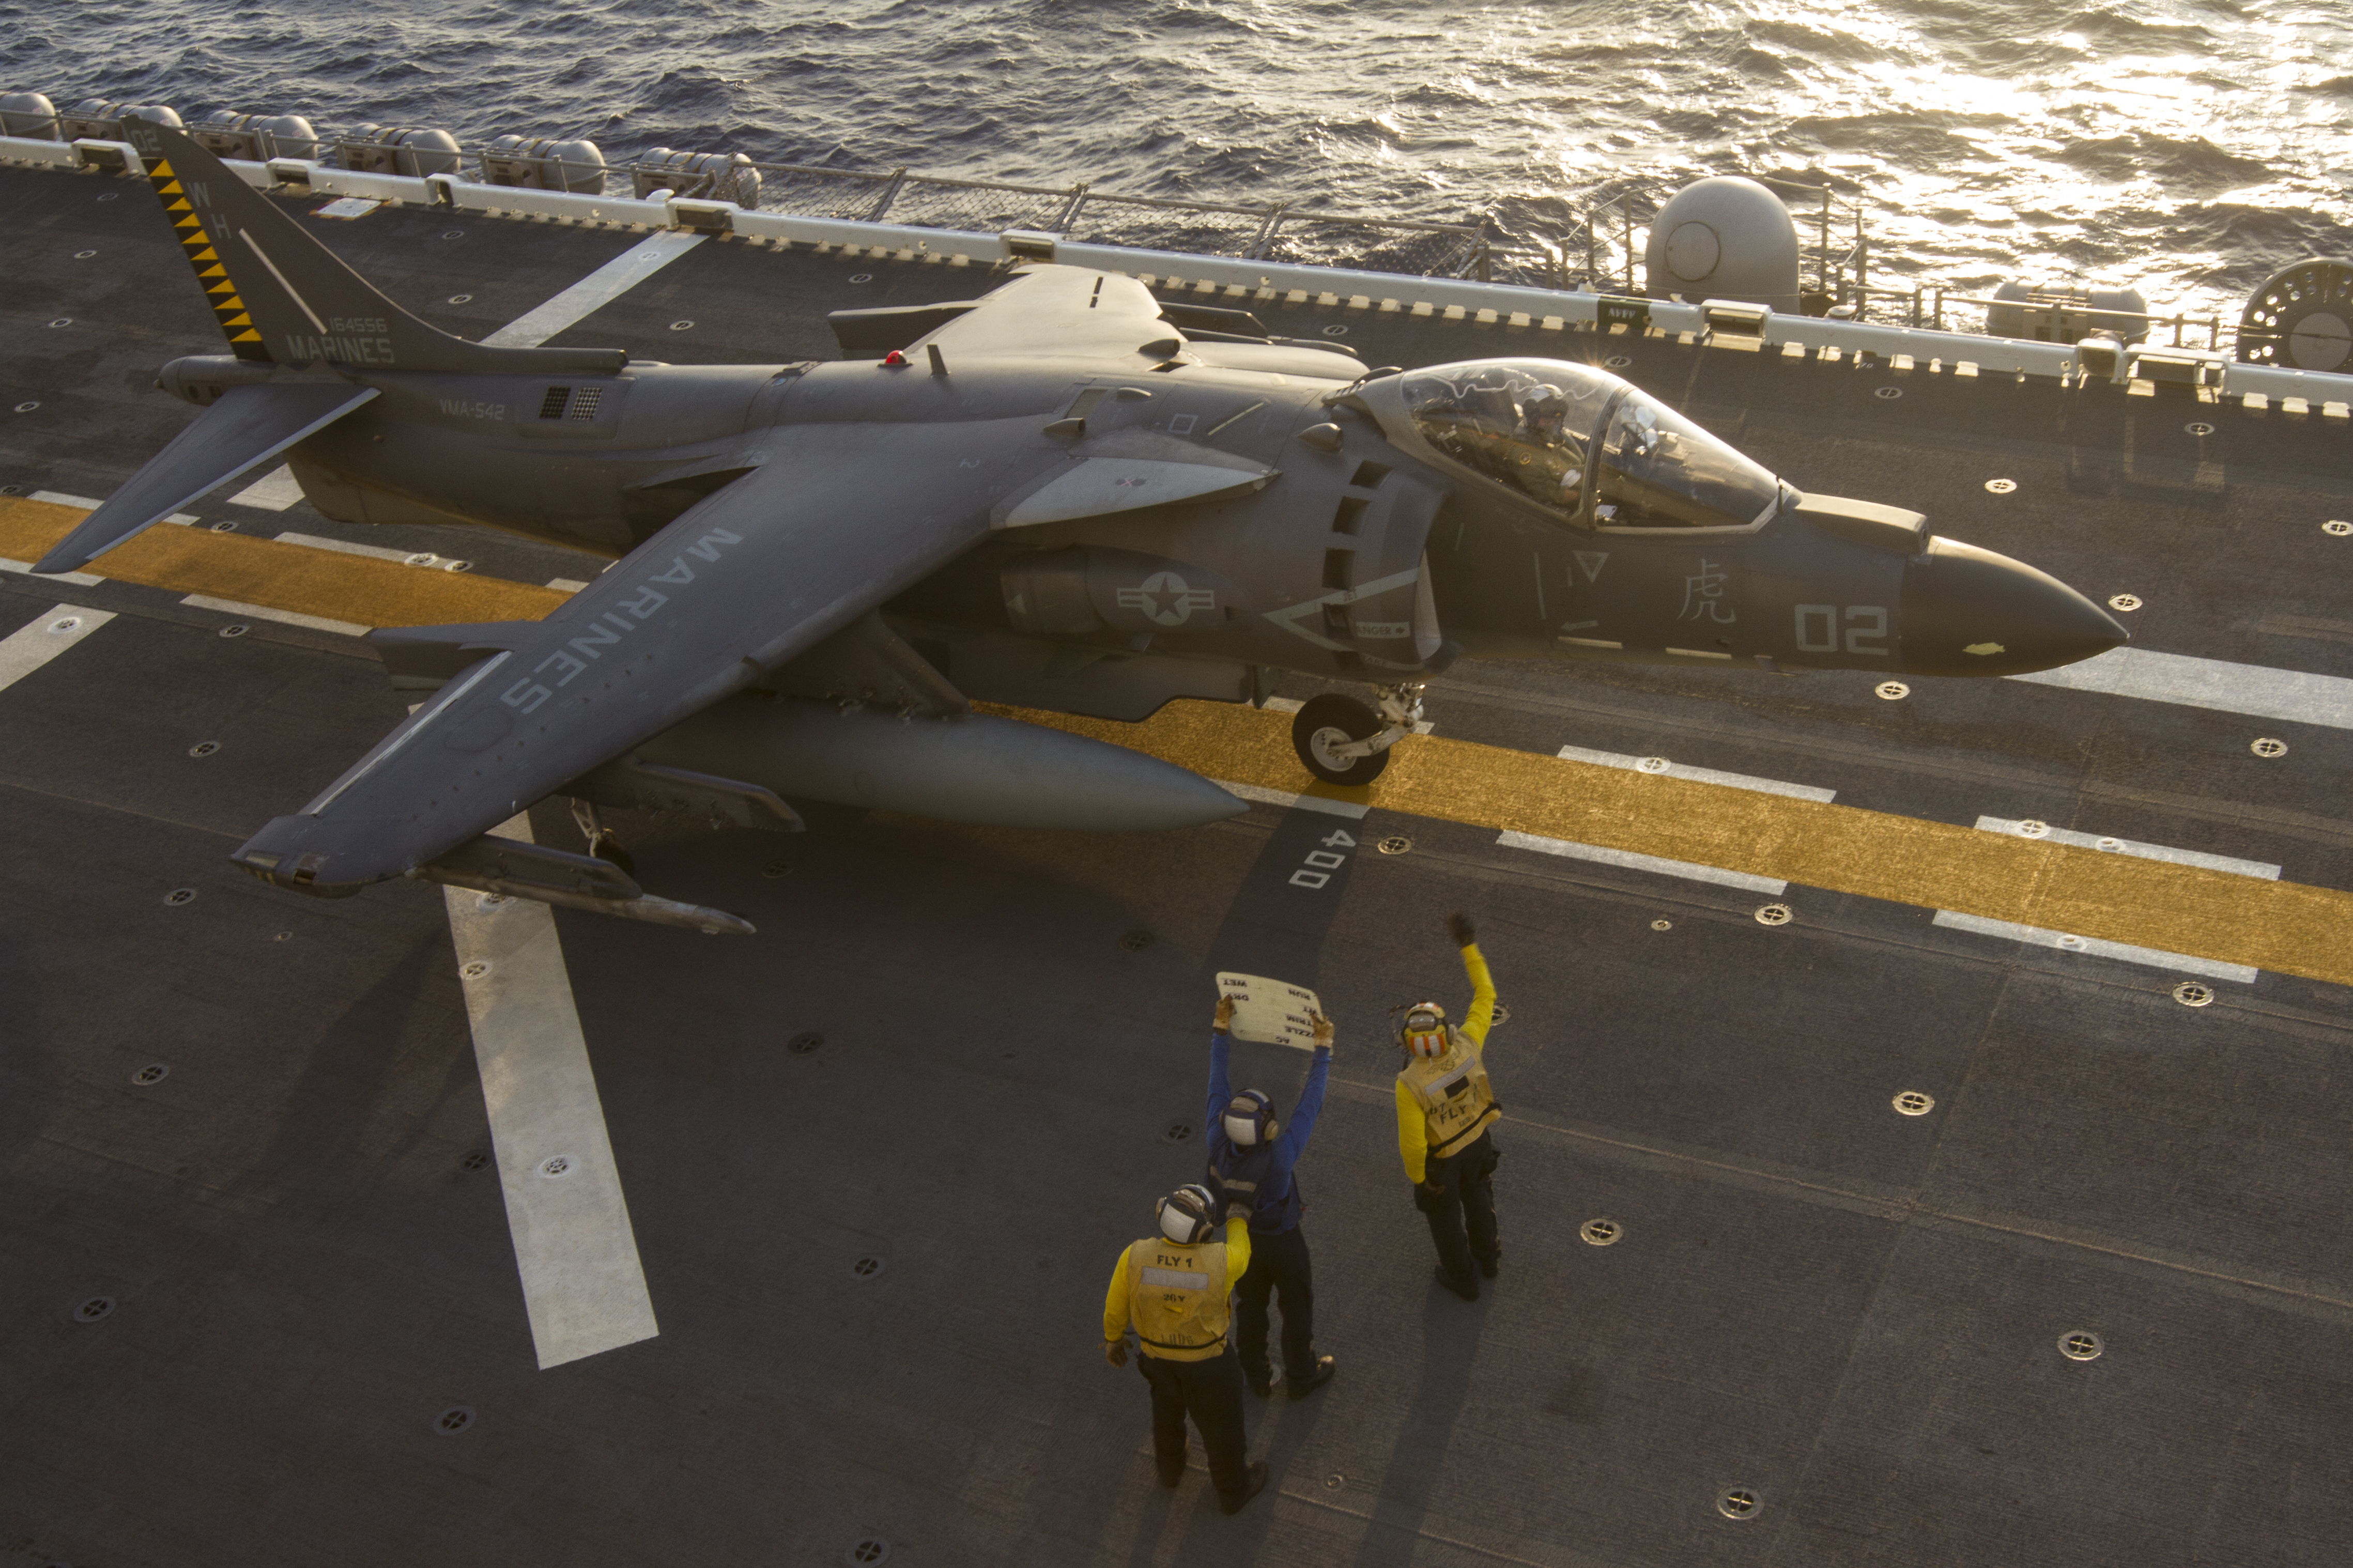 U.S. Navy flight deck aircraft controllers signal an AV-8B Harrier pilot during flight operations at sea aboard the USS Bonhomme Richard (LHD-6), while underway as part of the 31st MEU and BHR Expeditionary Strike Group, Aug. 27, 2016. US Marine Corps photo.